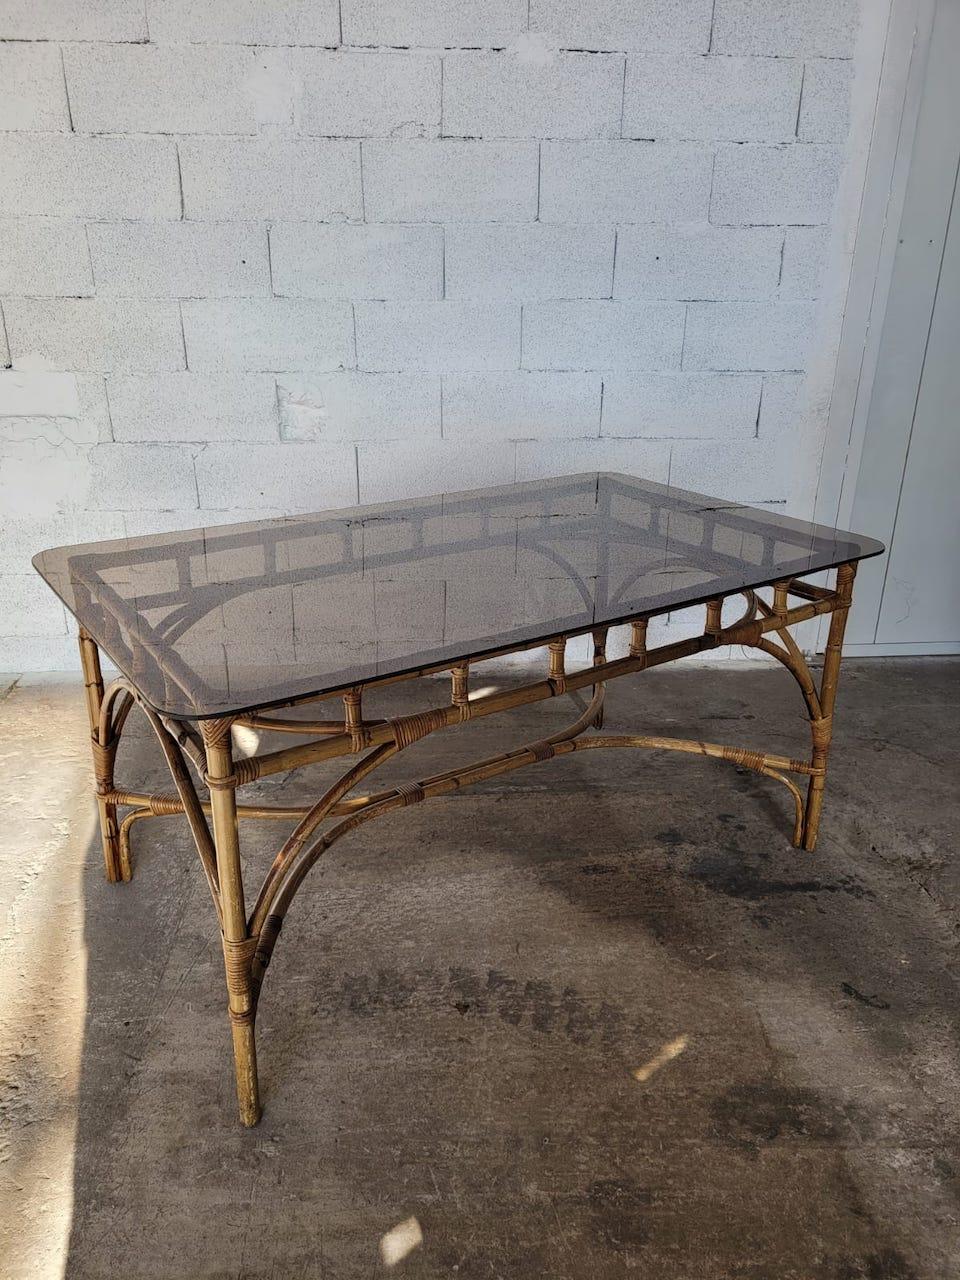 Italian mid-century rattan and bamboo dining table by Dal Vera, circa 1960.
Smoked glass table top.